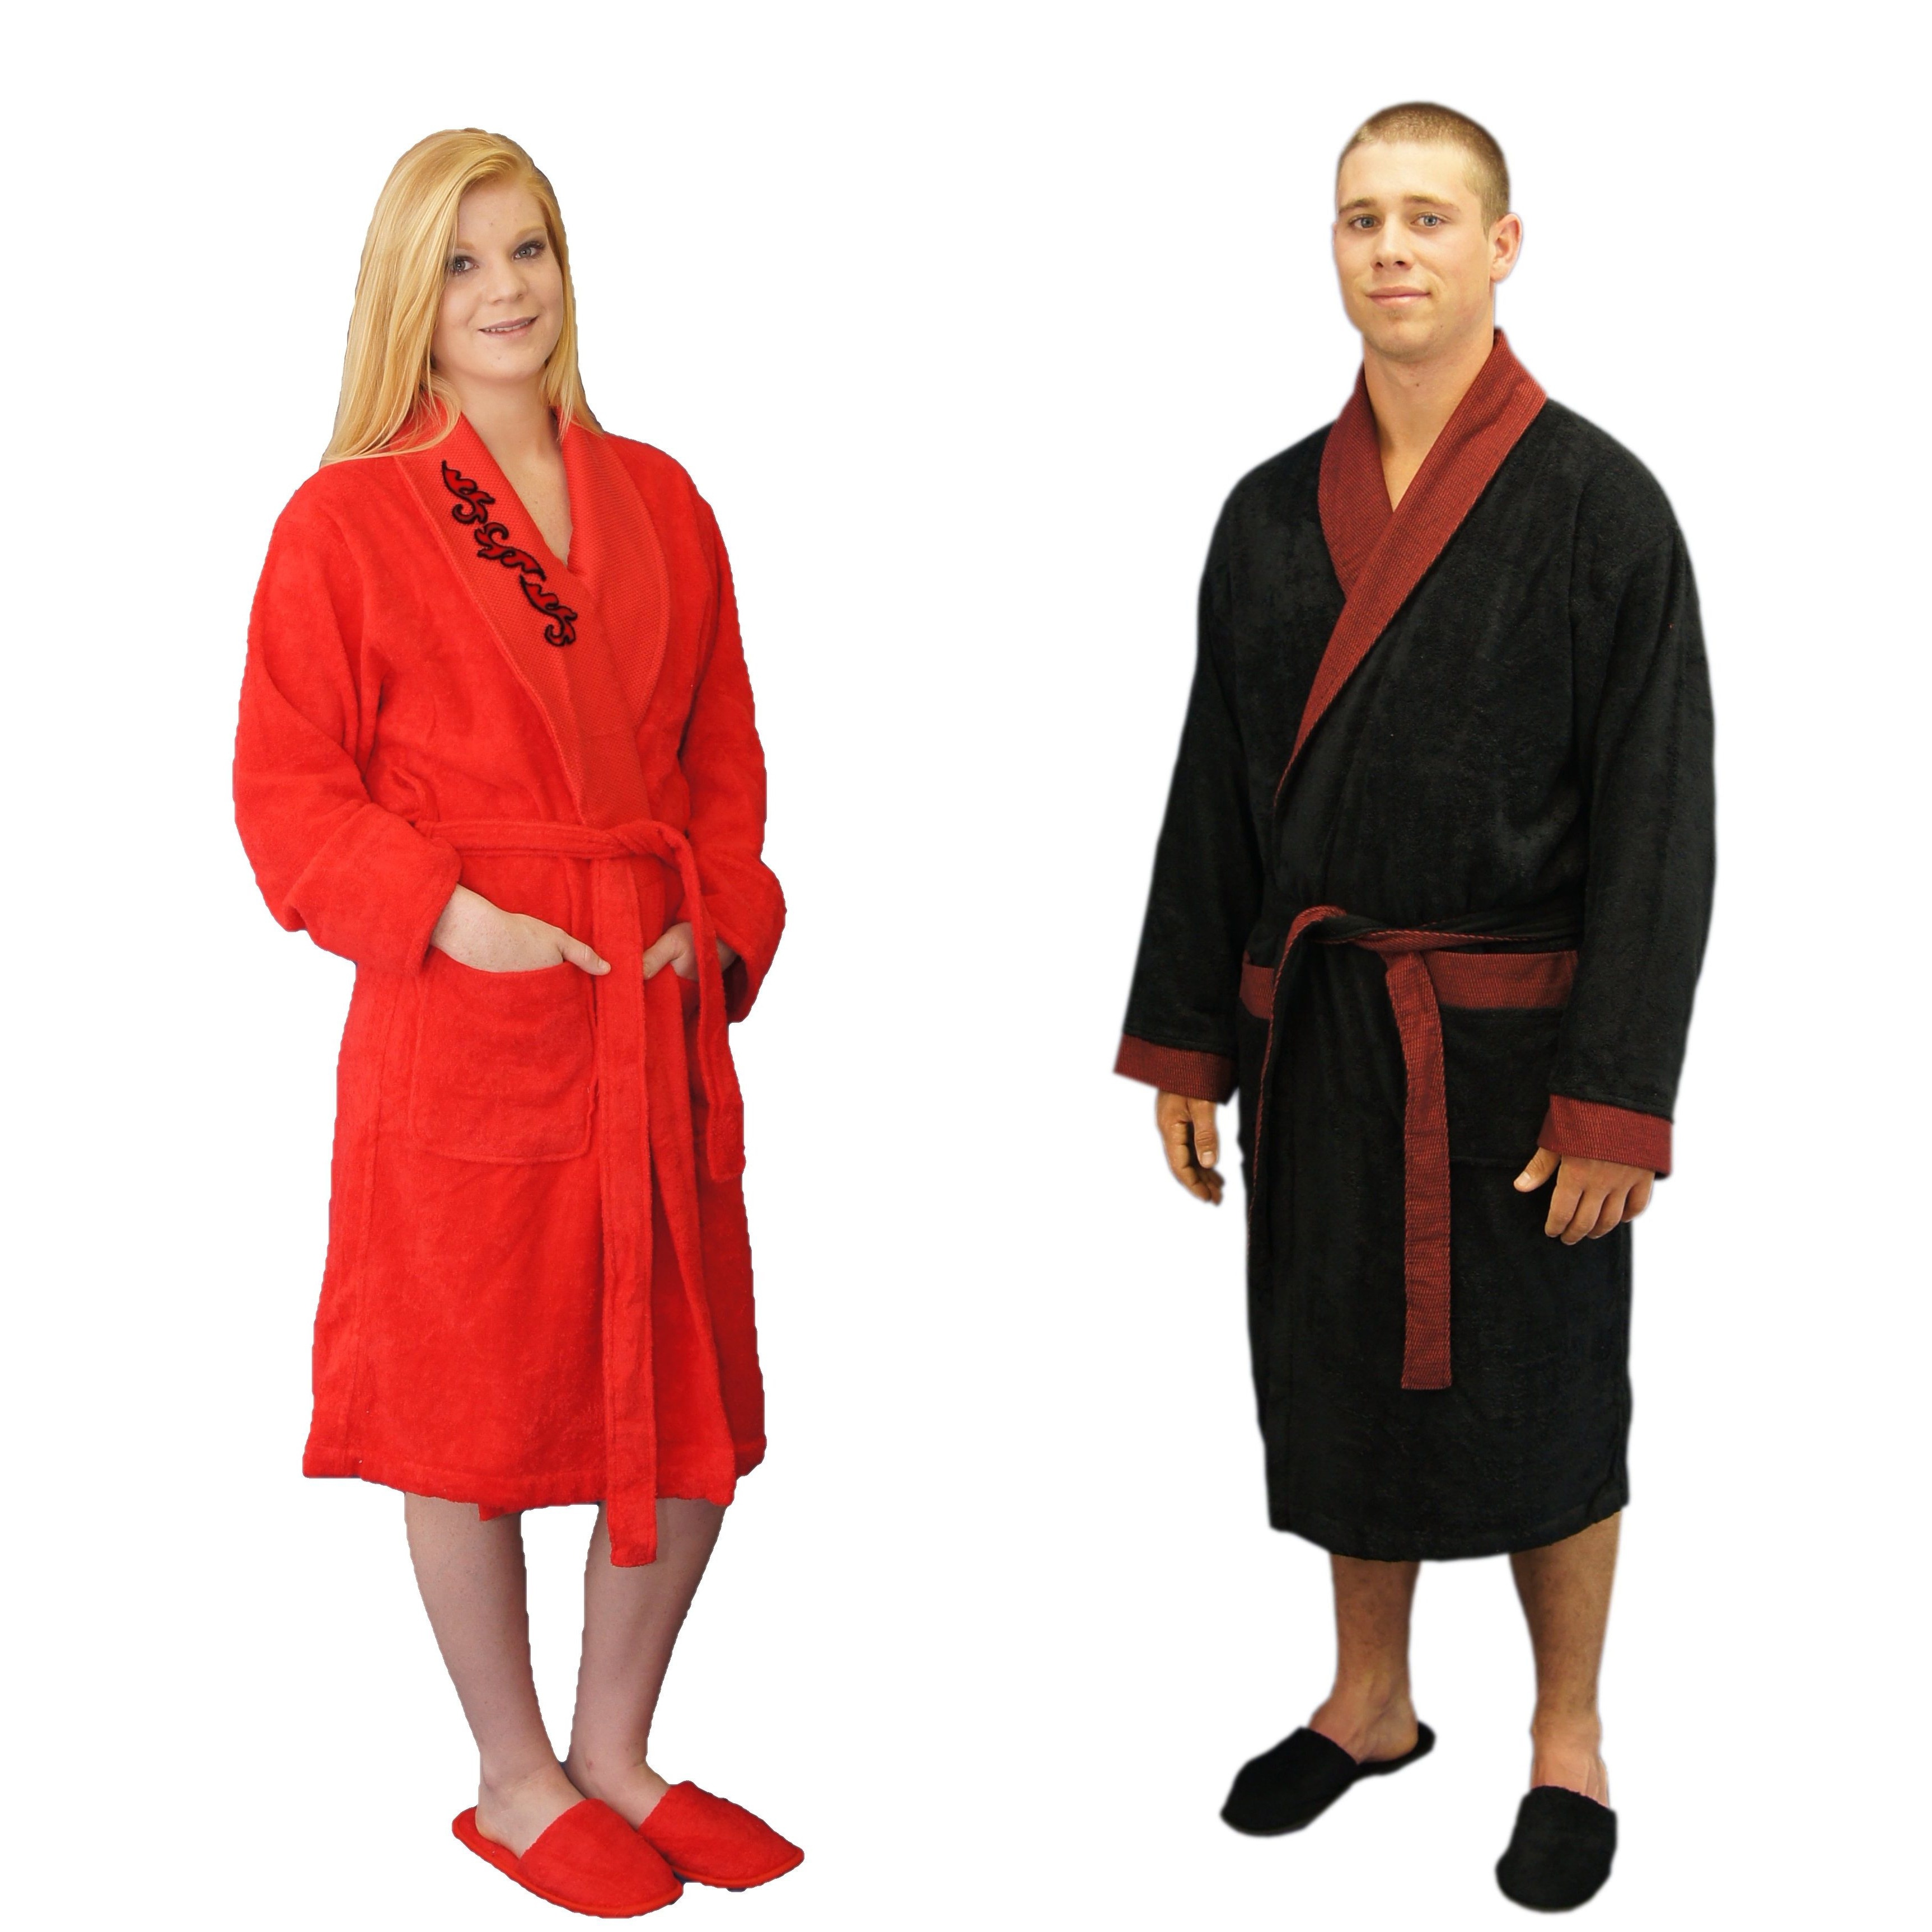 Brielle Home Turkish Cotton Blend 8 piece His and Hers Red/black Bath Robe Gift Set (Red, black Pattern Solid with applique stitch designBelt Double belt loop Pockets Two pocketsSleeves CuffedClick here to view our womens sizing guideClick here to vie